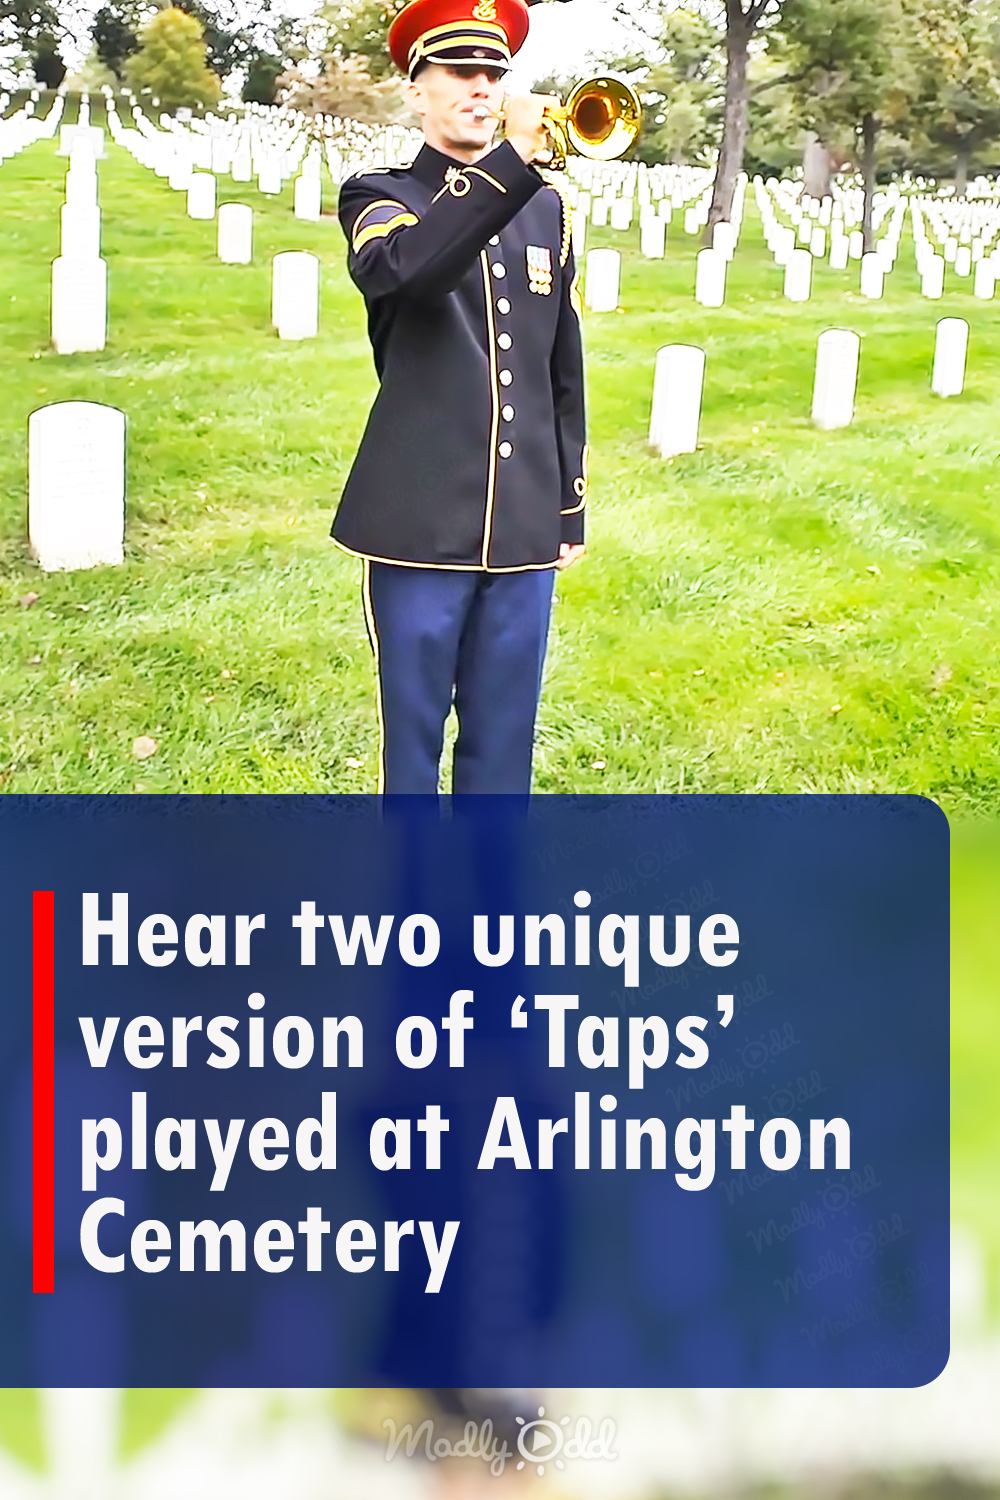 Hear two unique version of ‘Taps’ played at Arlington Cemetery